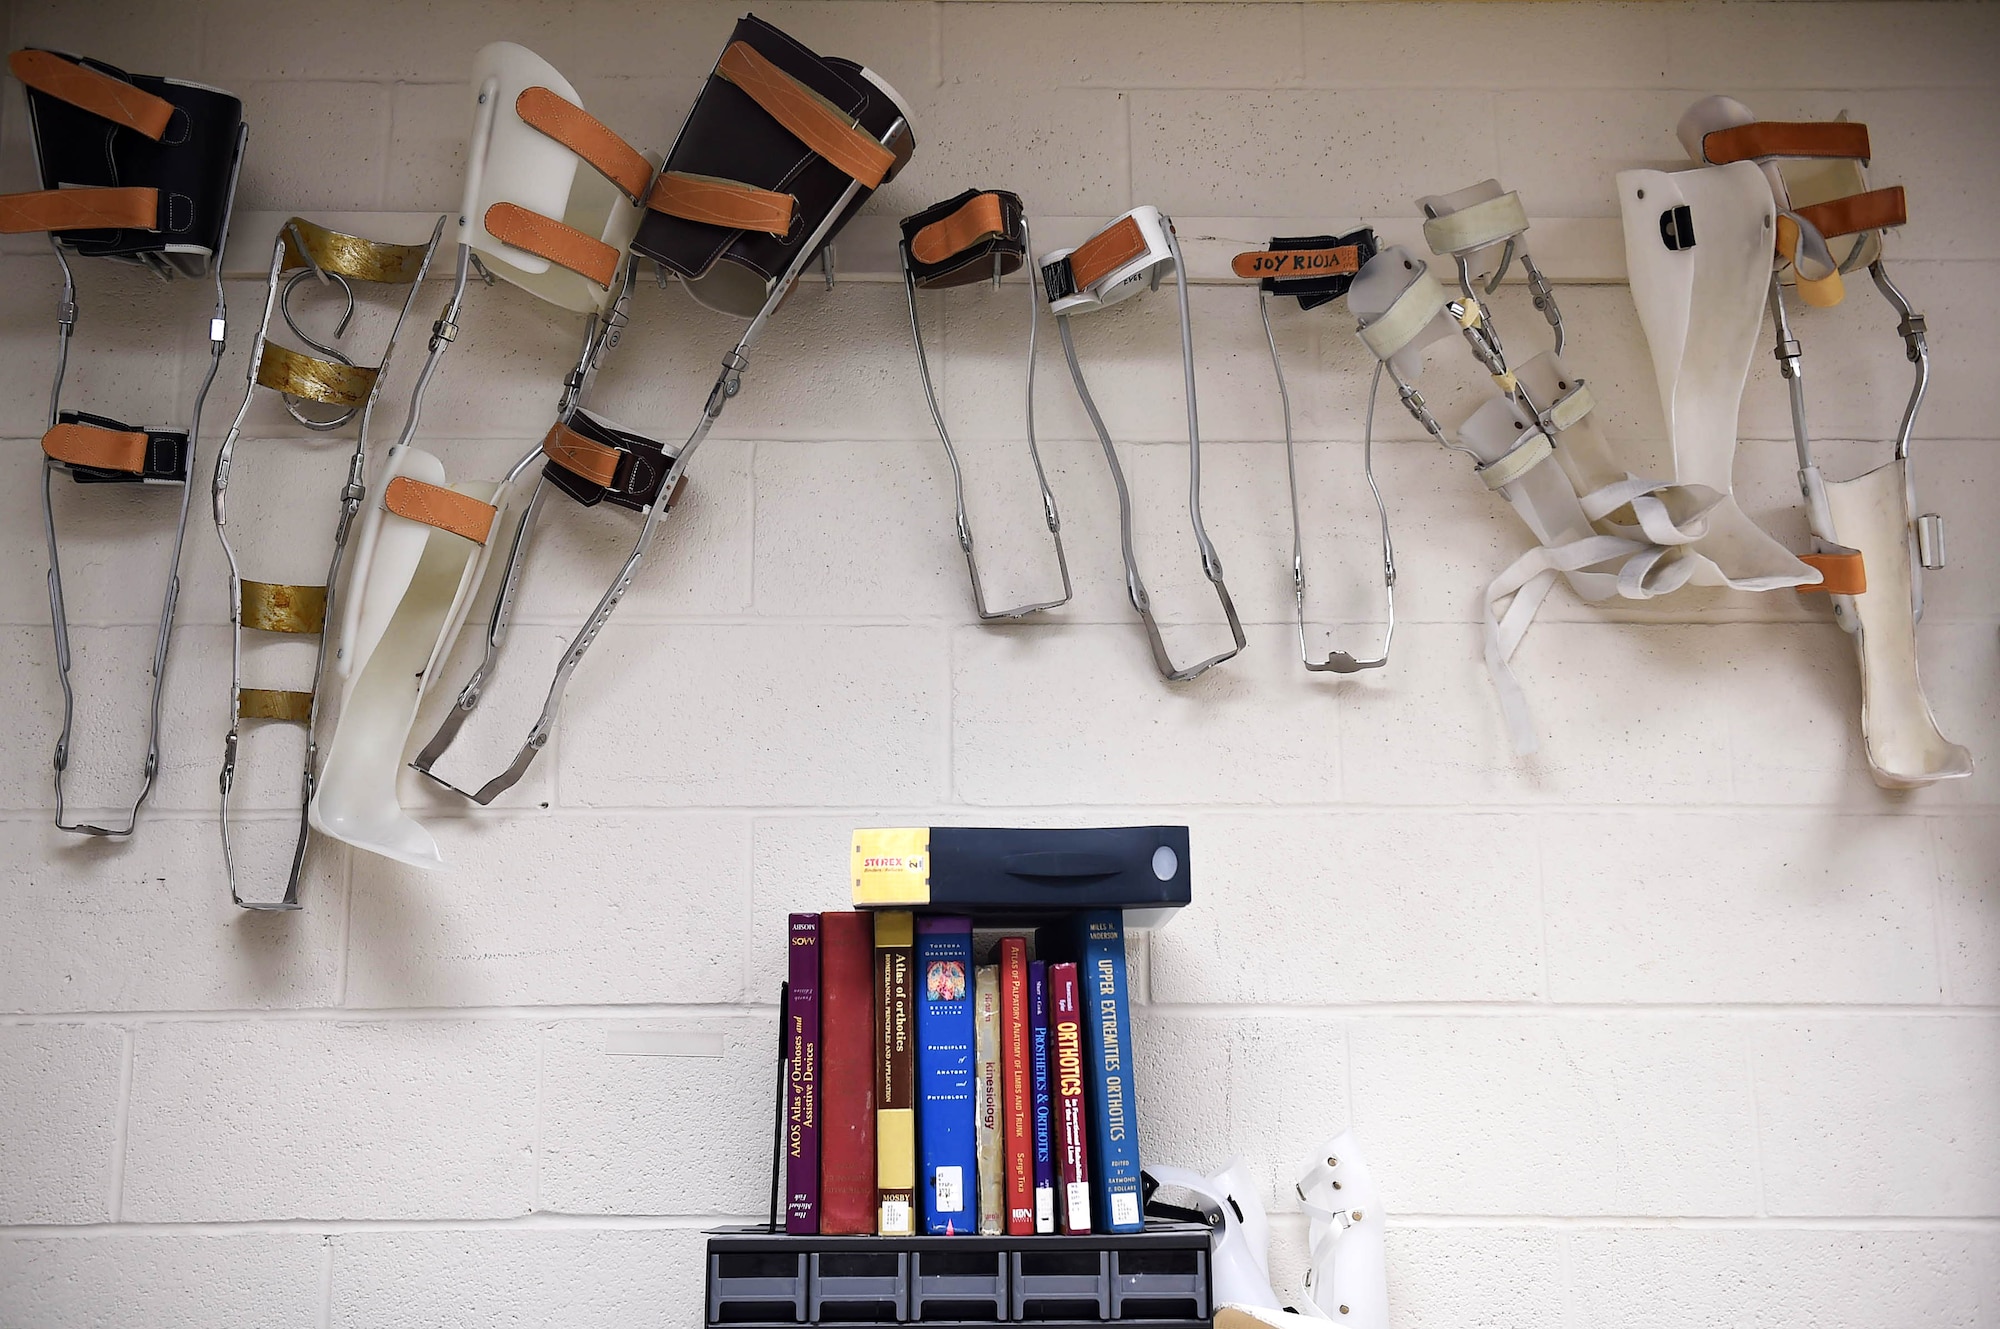 Leg braces created by former orthotics training students are displayed in the brace shop at the Wilford Hall Ambulatory Surgical Center, Joint Base San Antonio-Lackland, Texas, Aug. 24, 2016.(U.S. Air Force photo/Staff Sgt. Jerilyn Quintanilla)